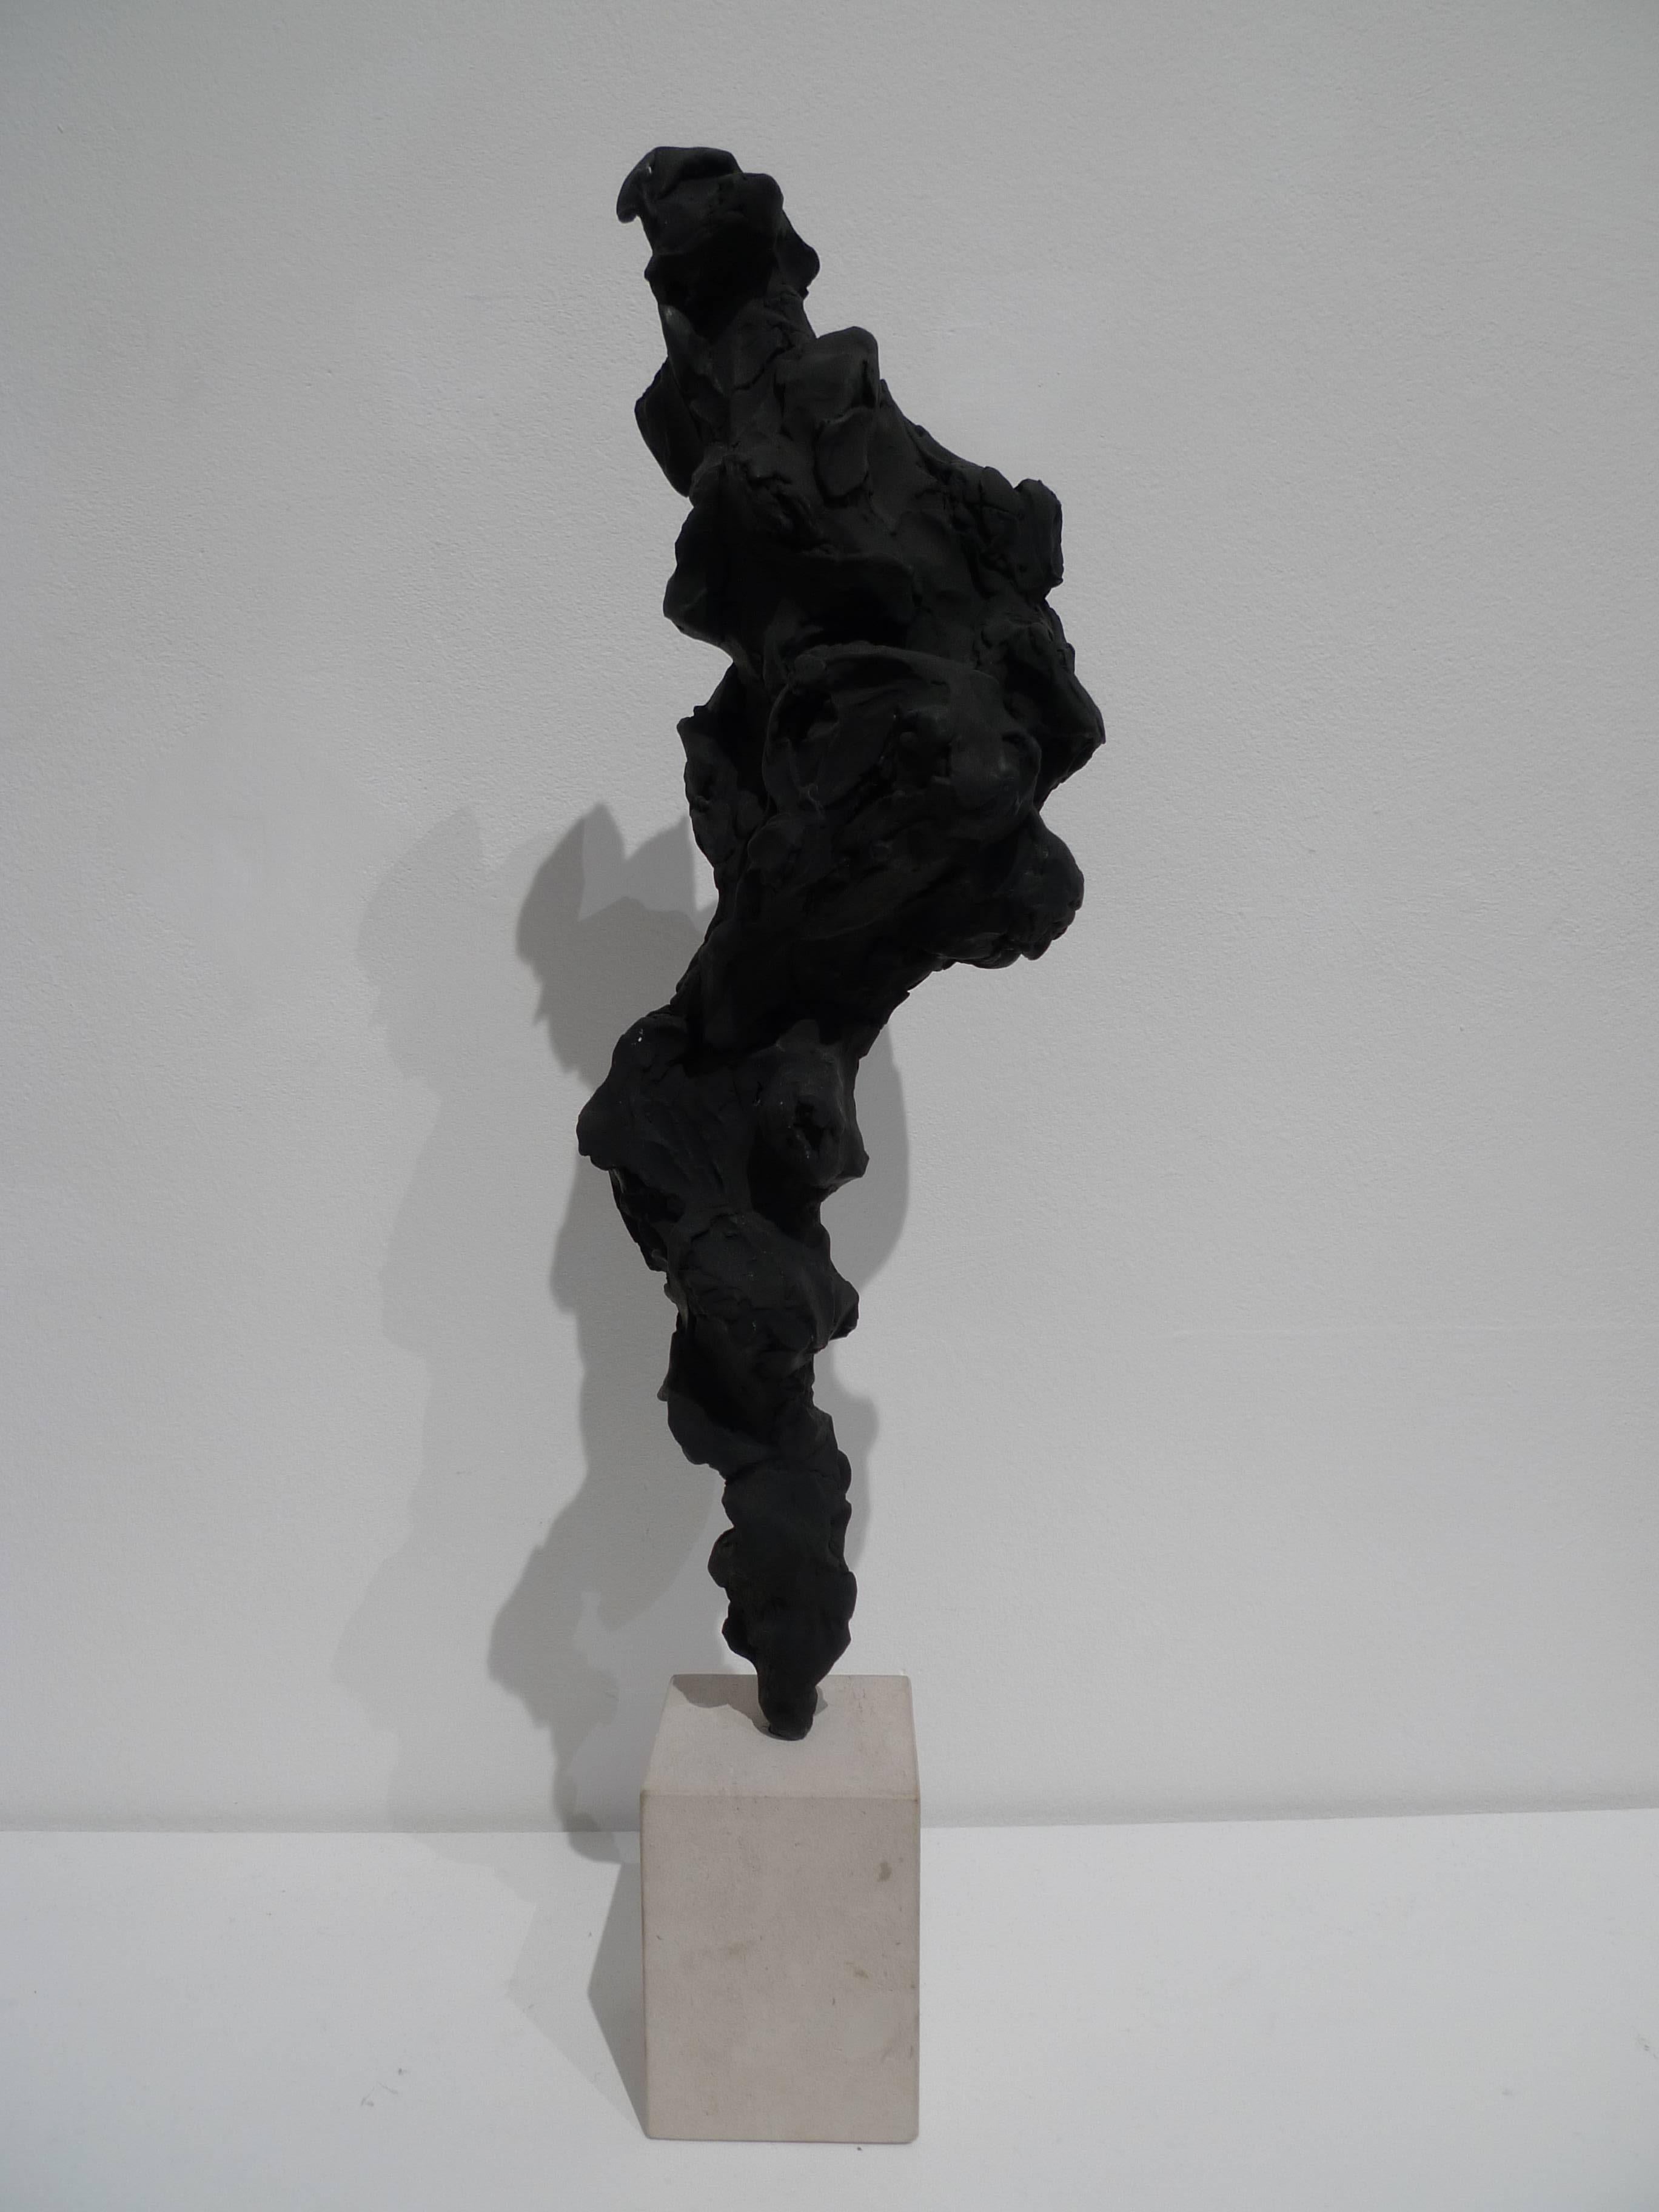 Artist Guy Haddon Grant is one of Britain’s most important young sculptors. His aesthetically fascinating works are inspired by natural organic forms and the human figure. With works made from treasuries of raw substances, including charcoal,